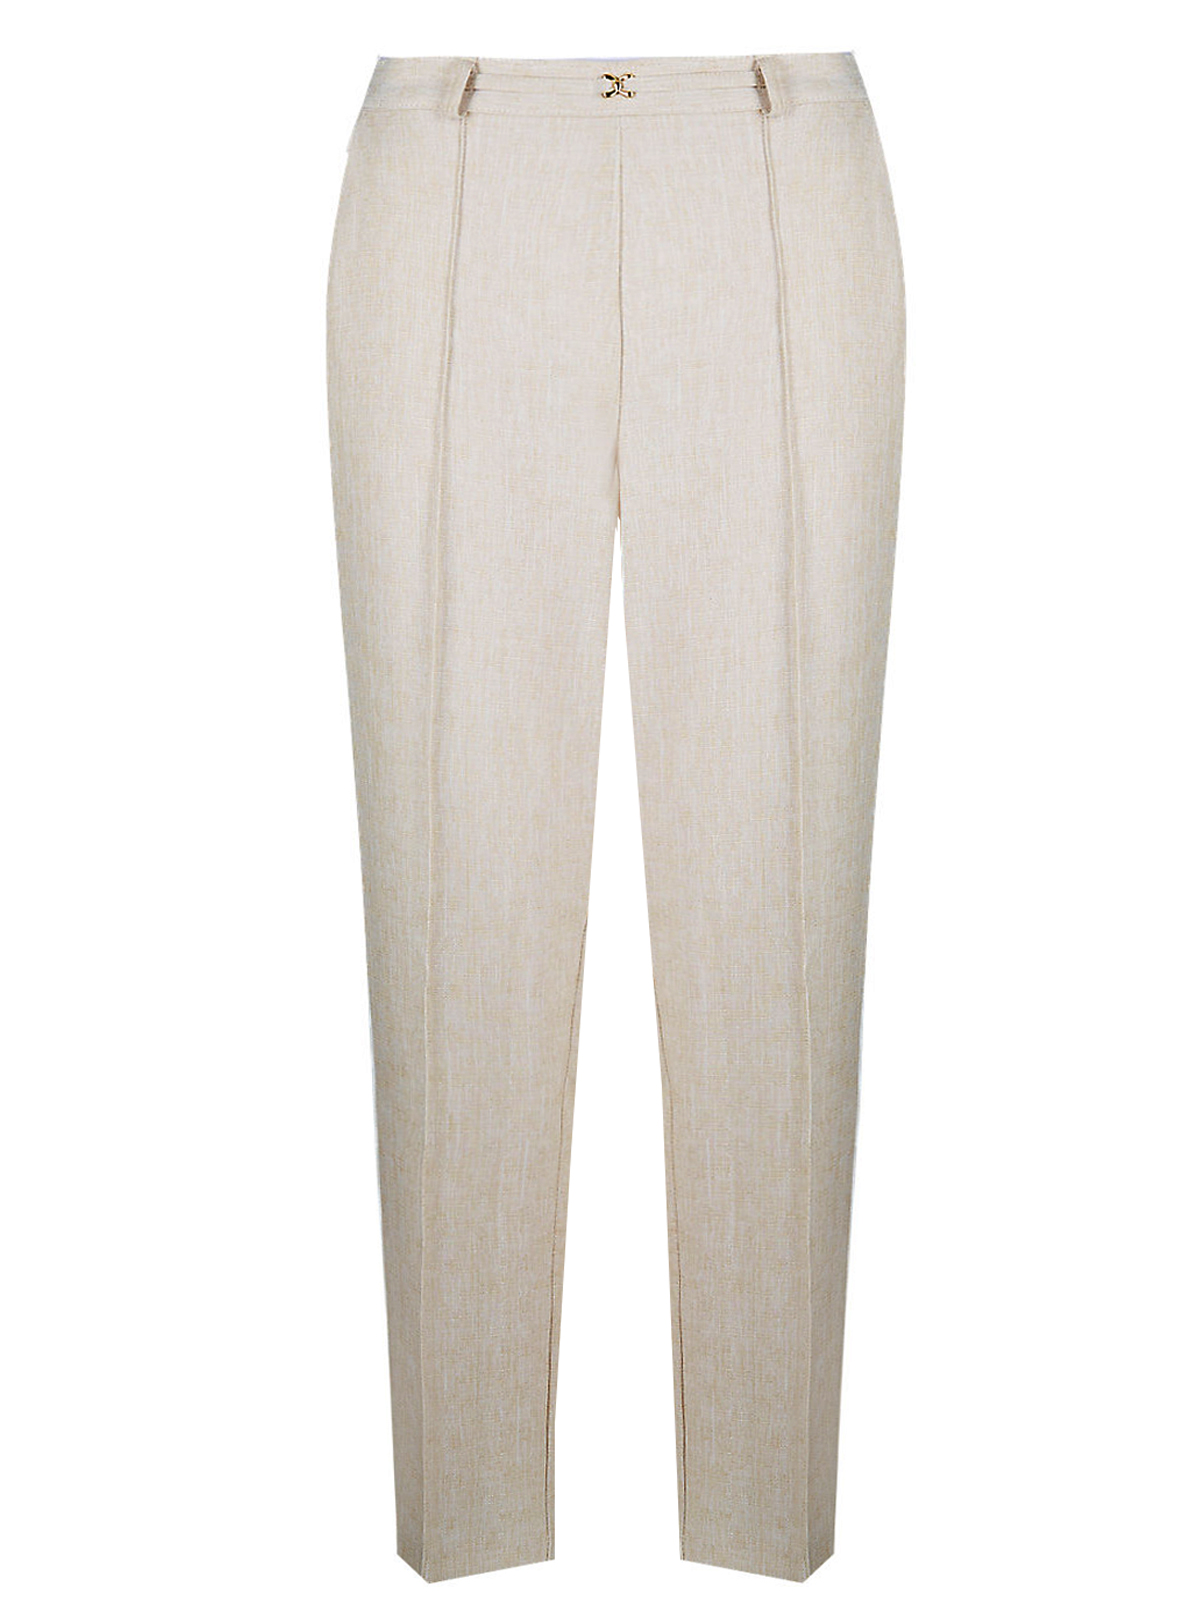 Marks and Spencer - - M&5 NEUTRAL Straight Leg Seam Trousers - Size 18 ...